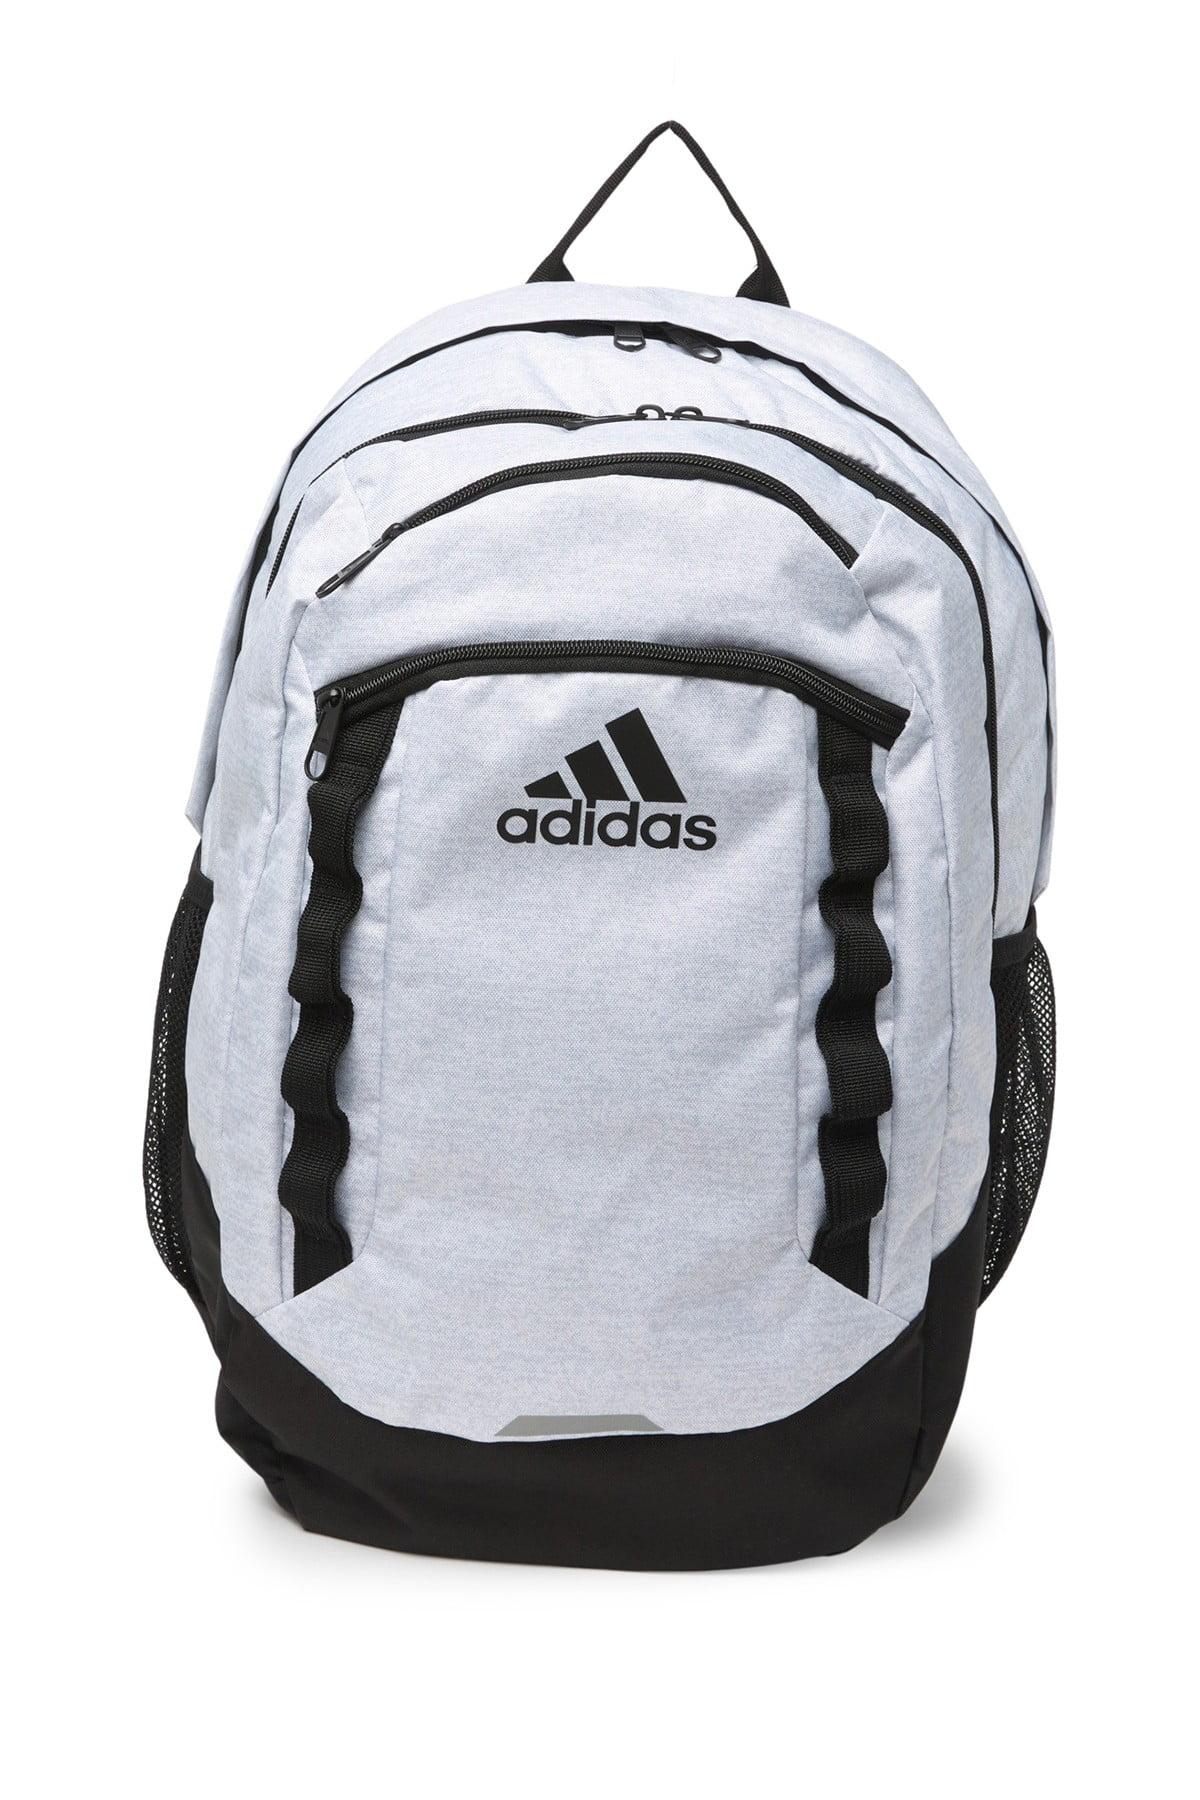 adidas Synthetic Excel V Backpack in White - Lyst